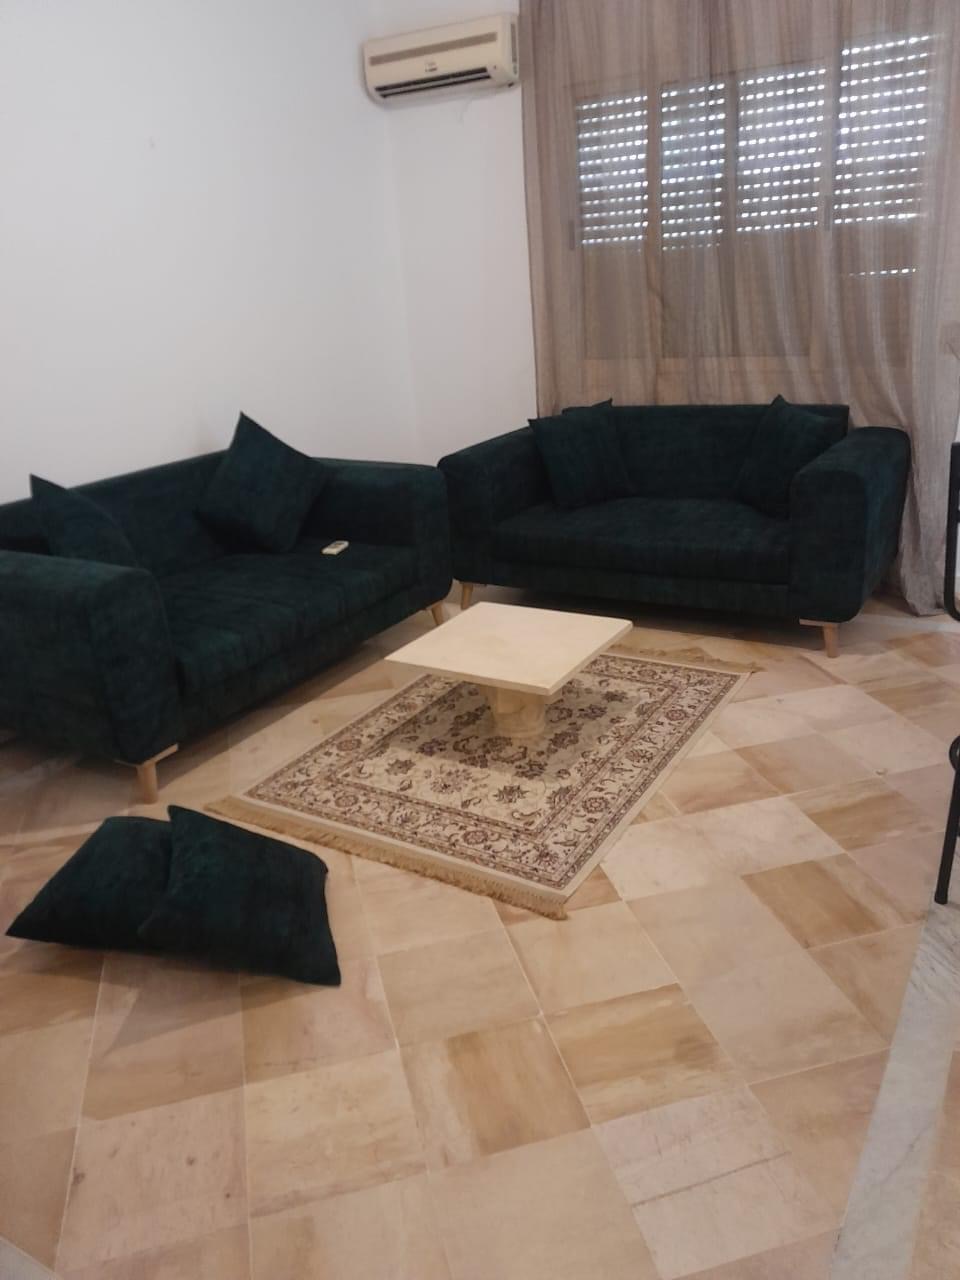 Ariana Ville Cite Ennasr 1 Location Appart. 2 pices Appartement s1 meuble 1200